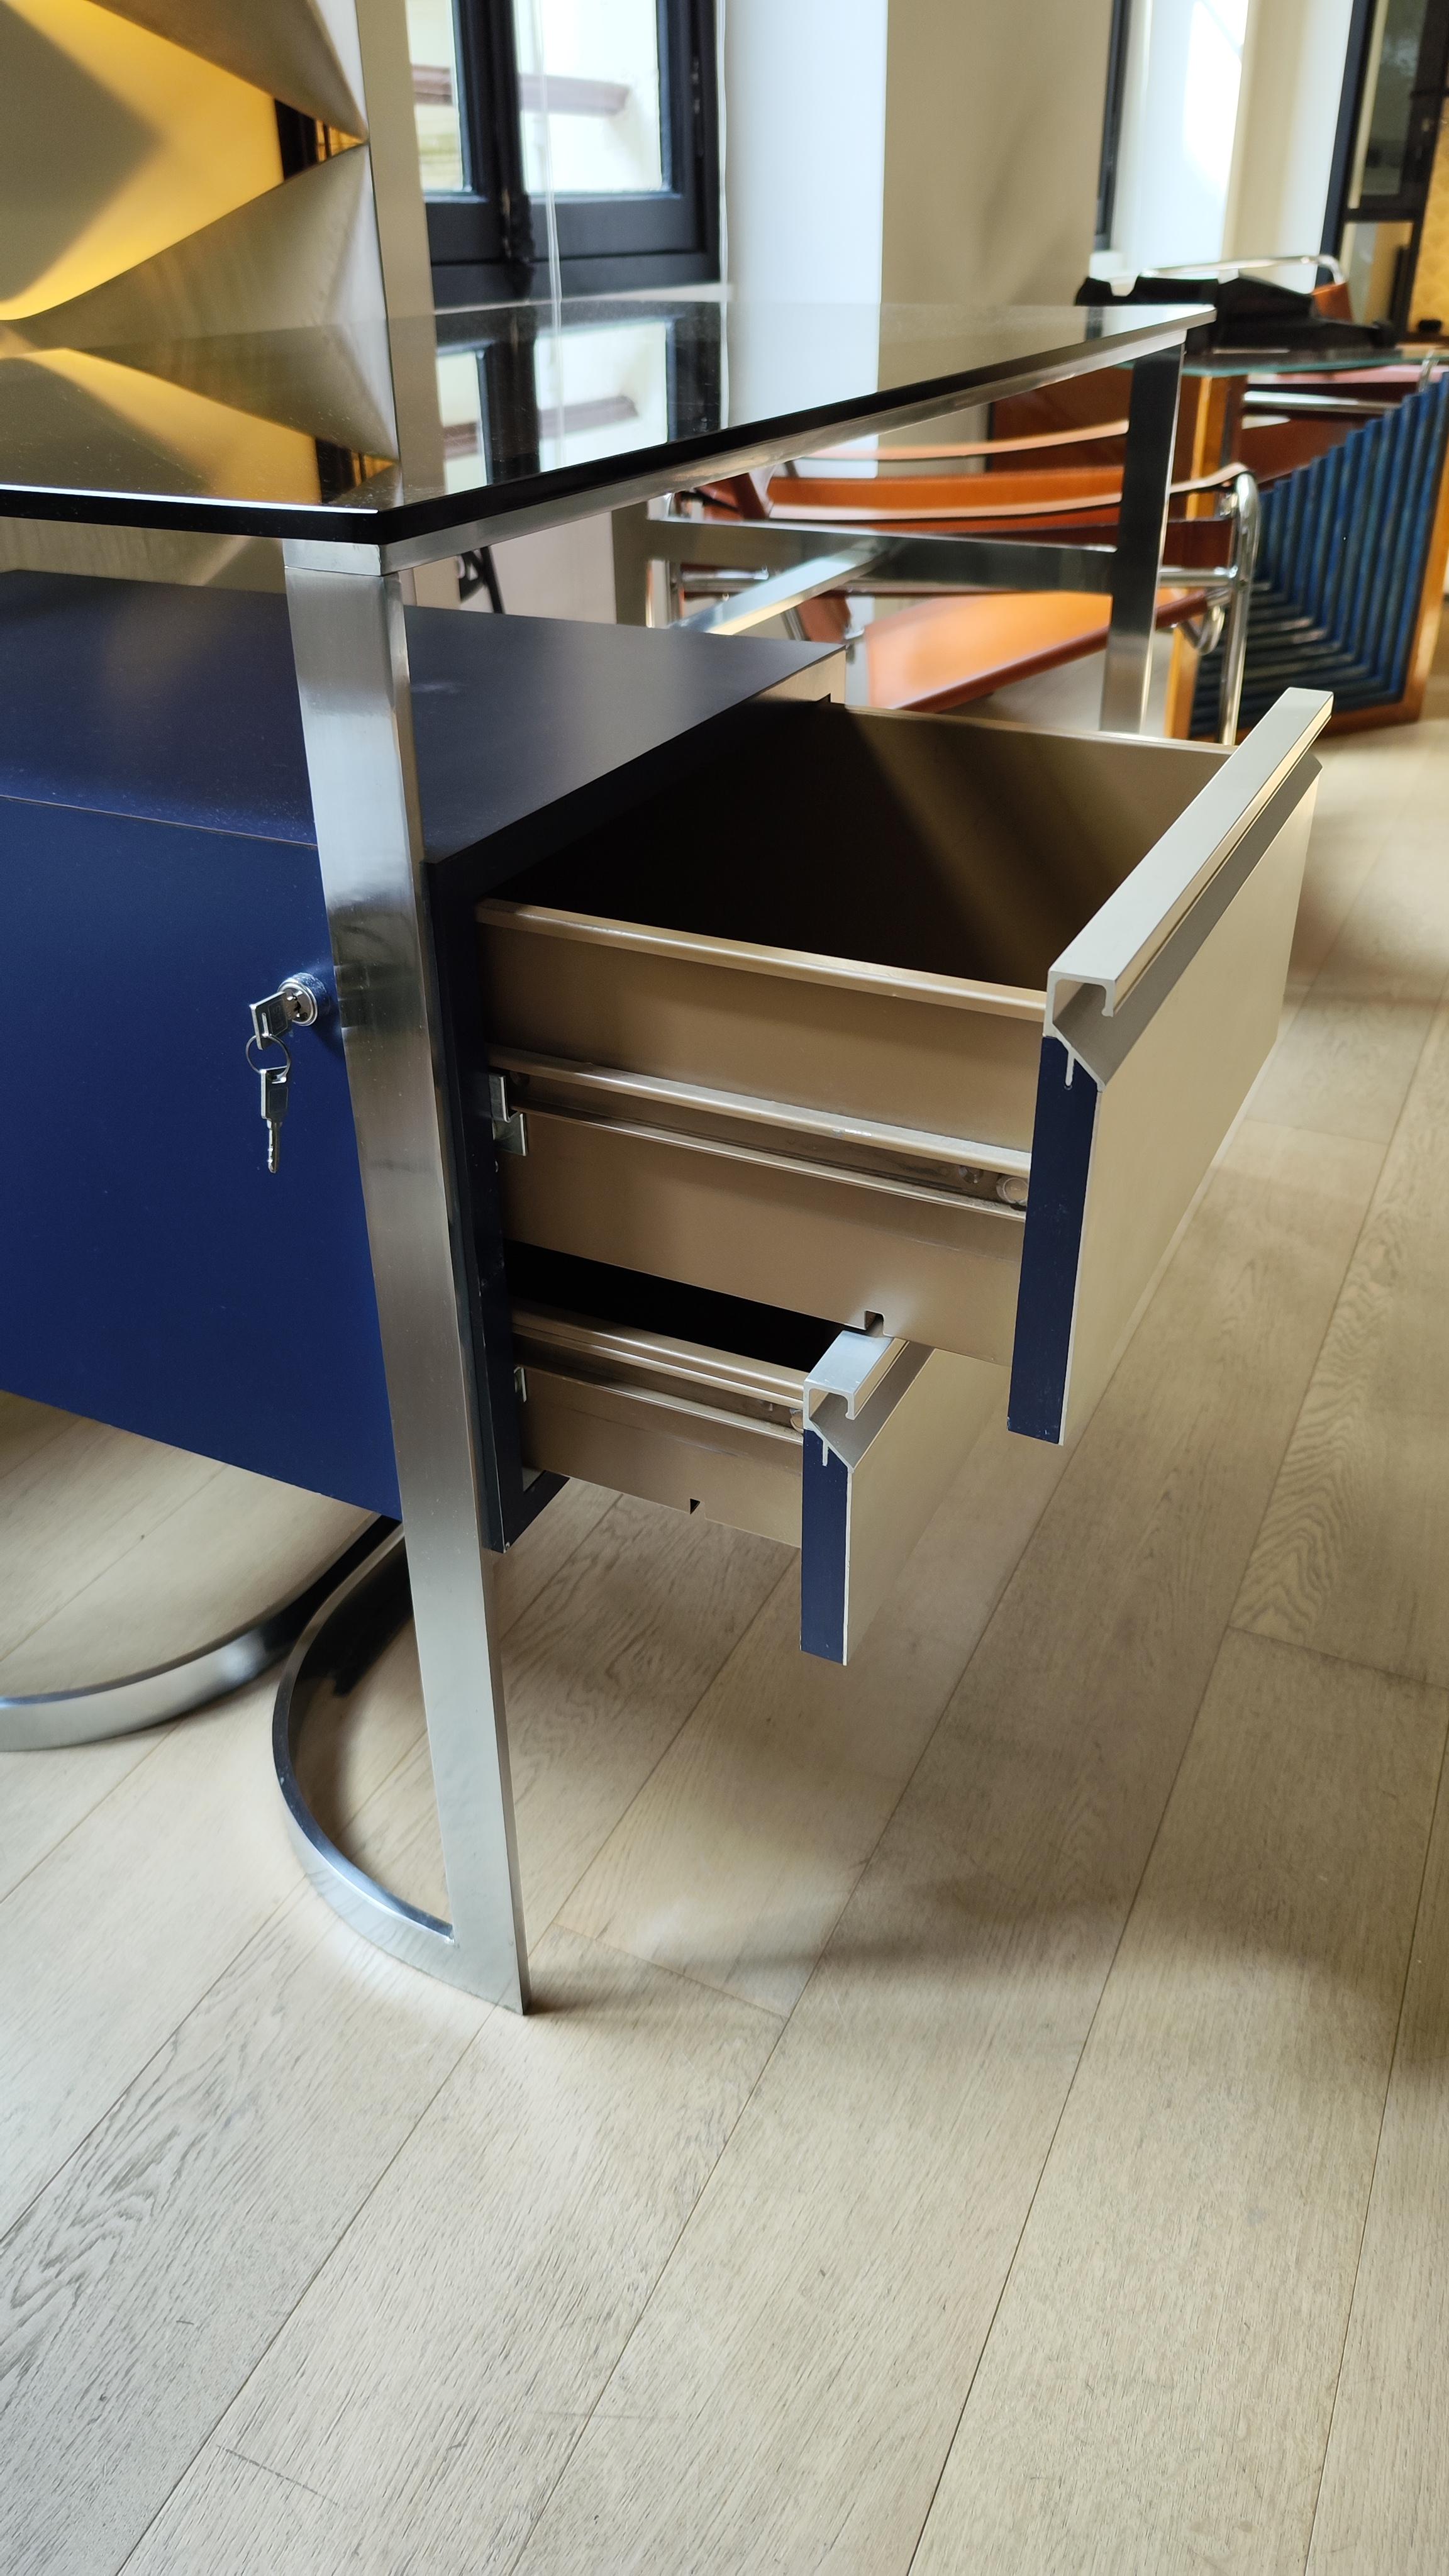 Patrice Maffei Desk for Kappa, 70s, Brushed Stainless Steel, Smoked Glass, 1970 For Sale 9